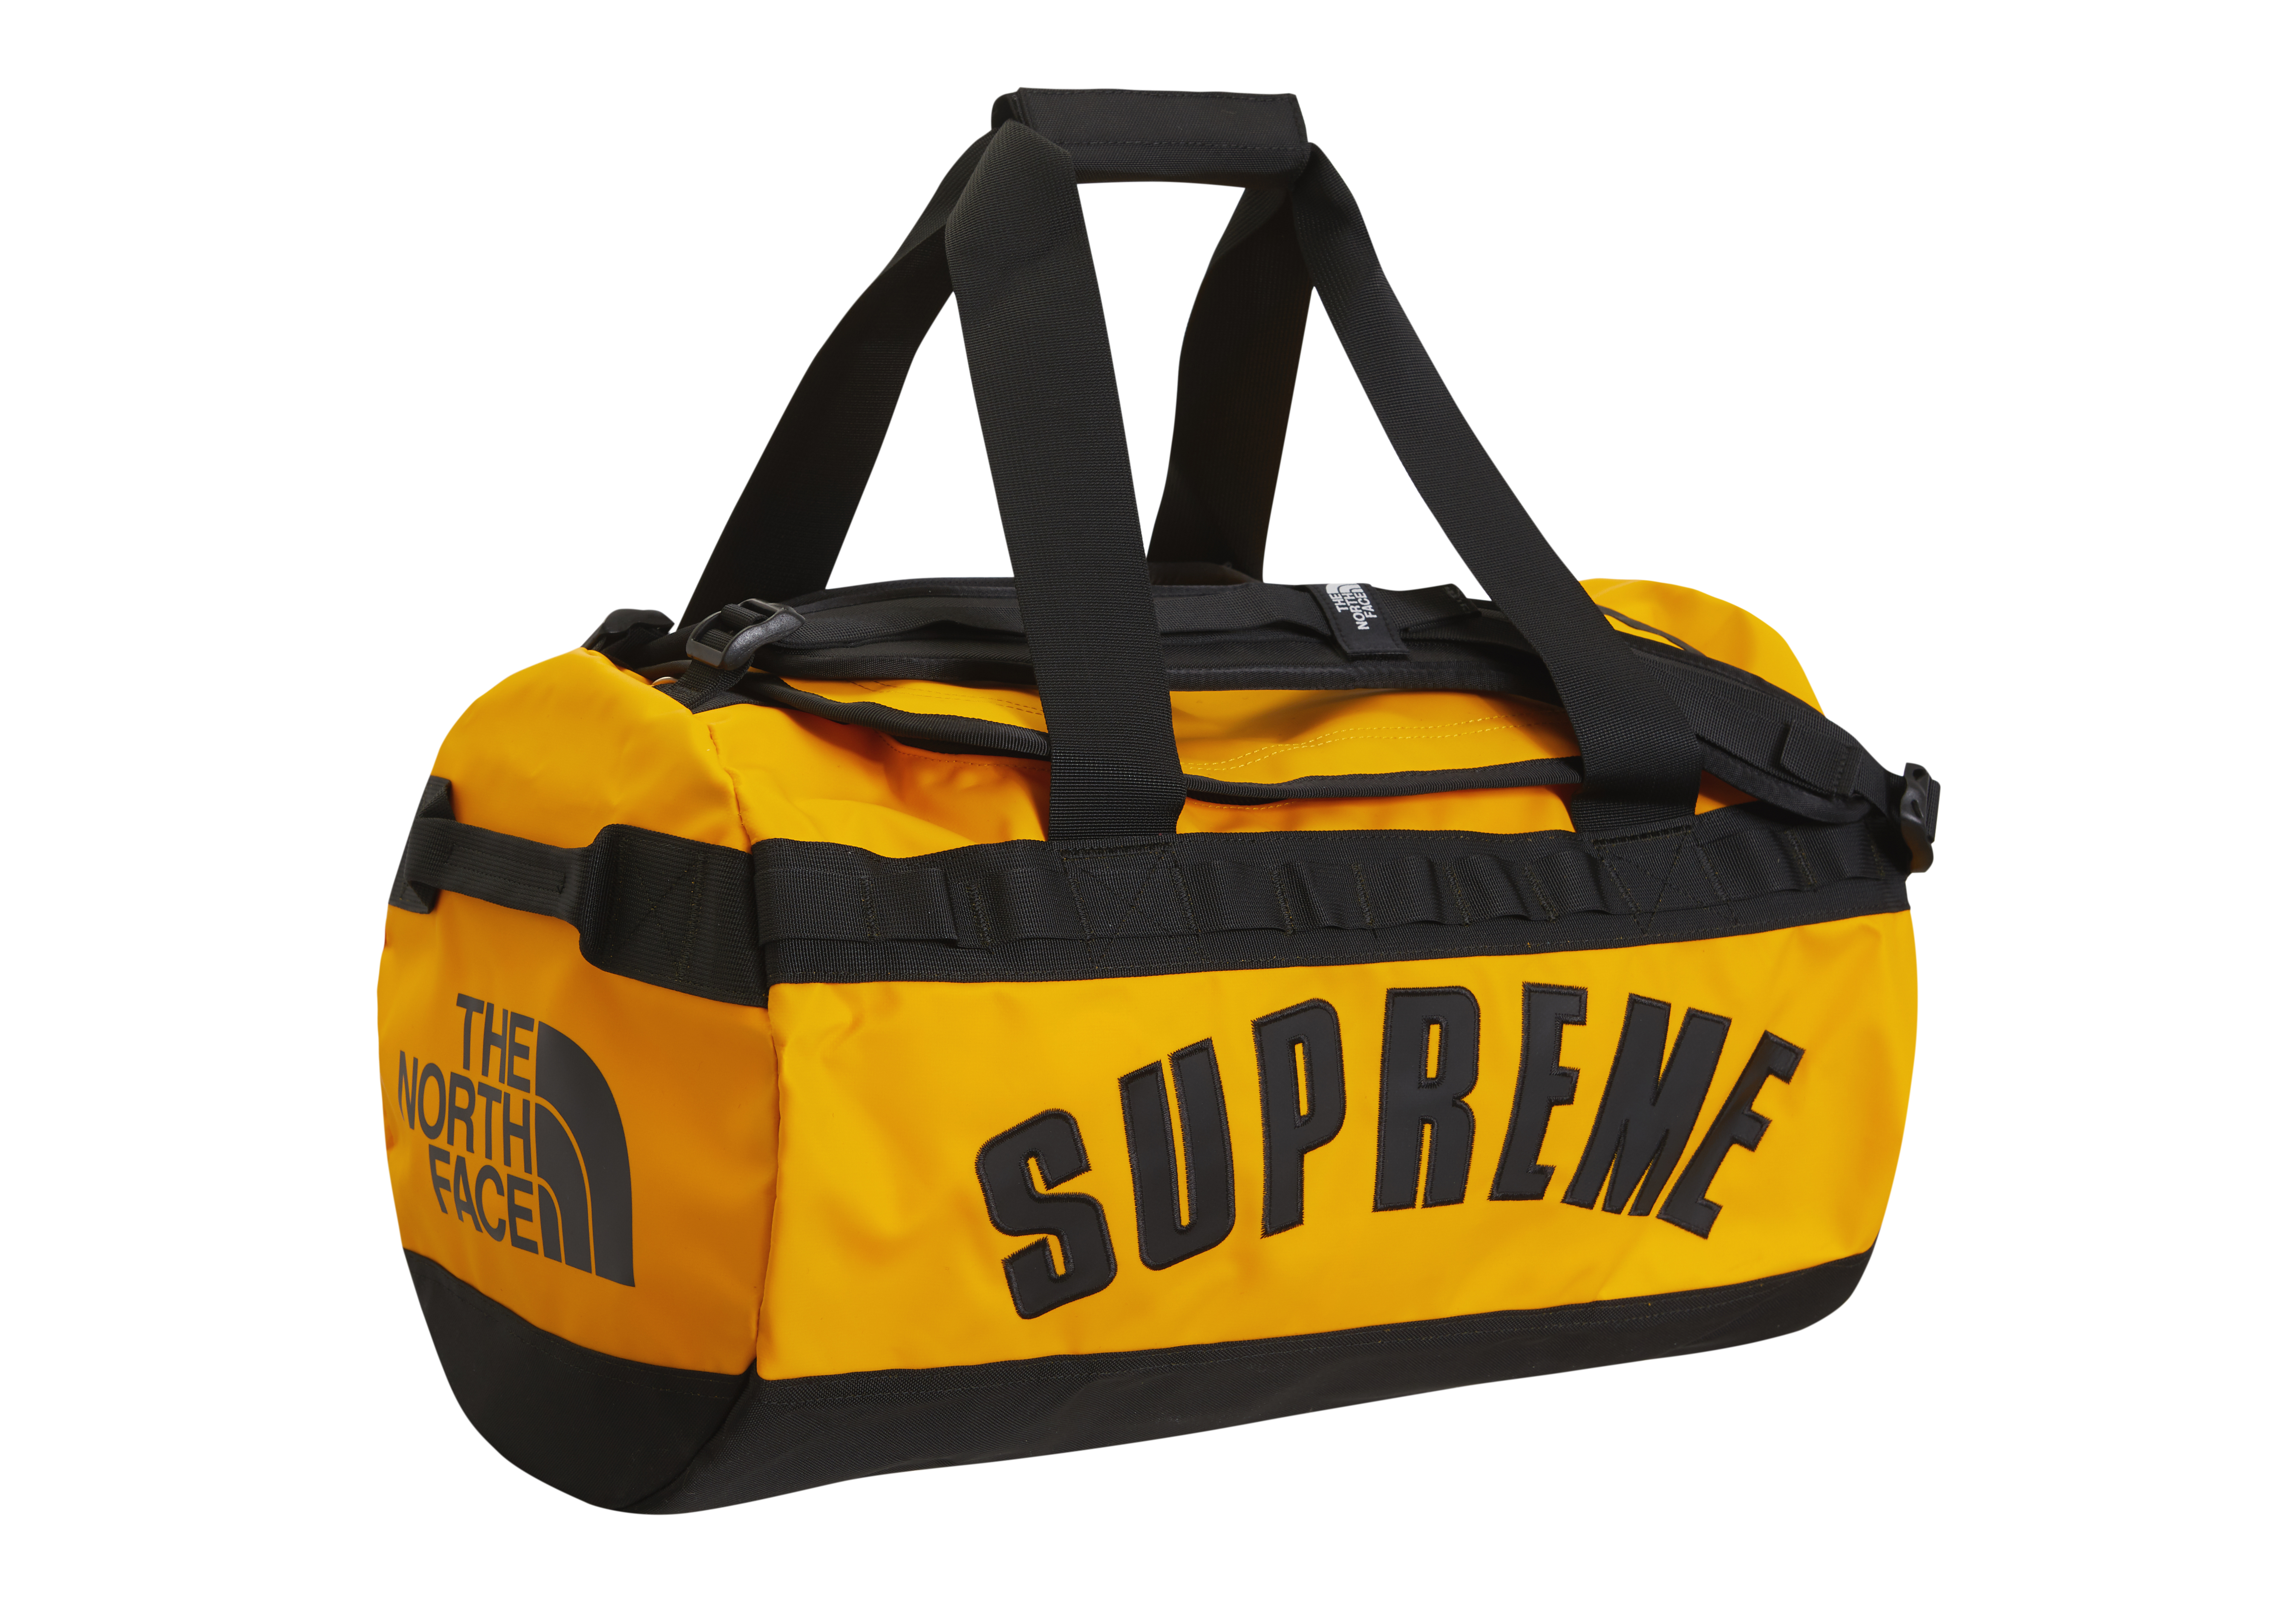 the north face bag yellow